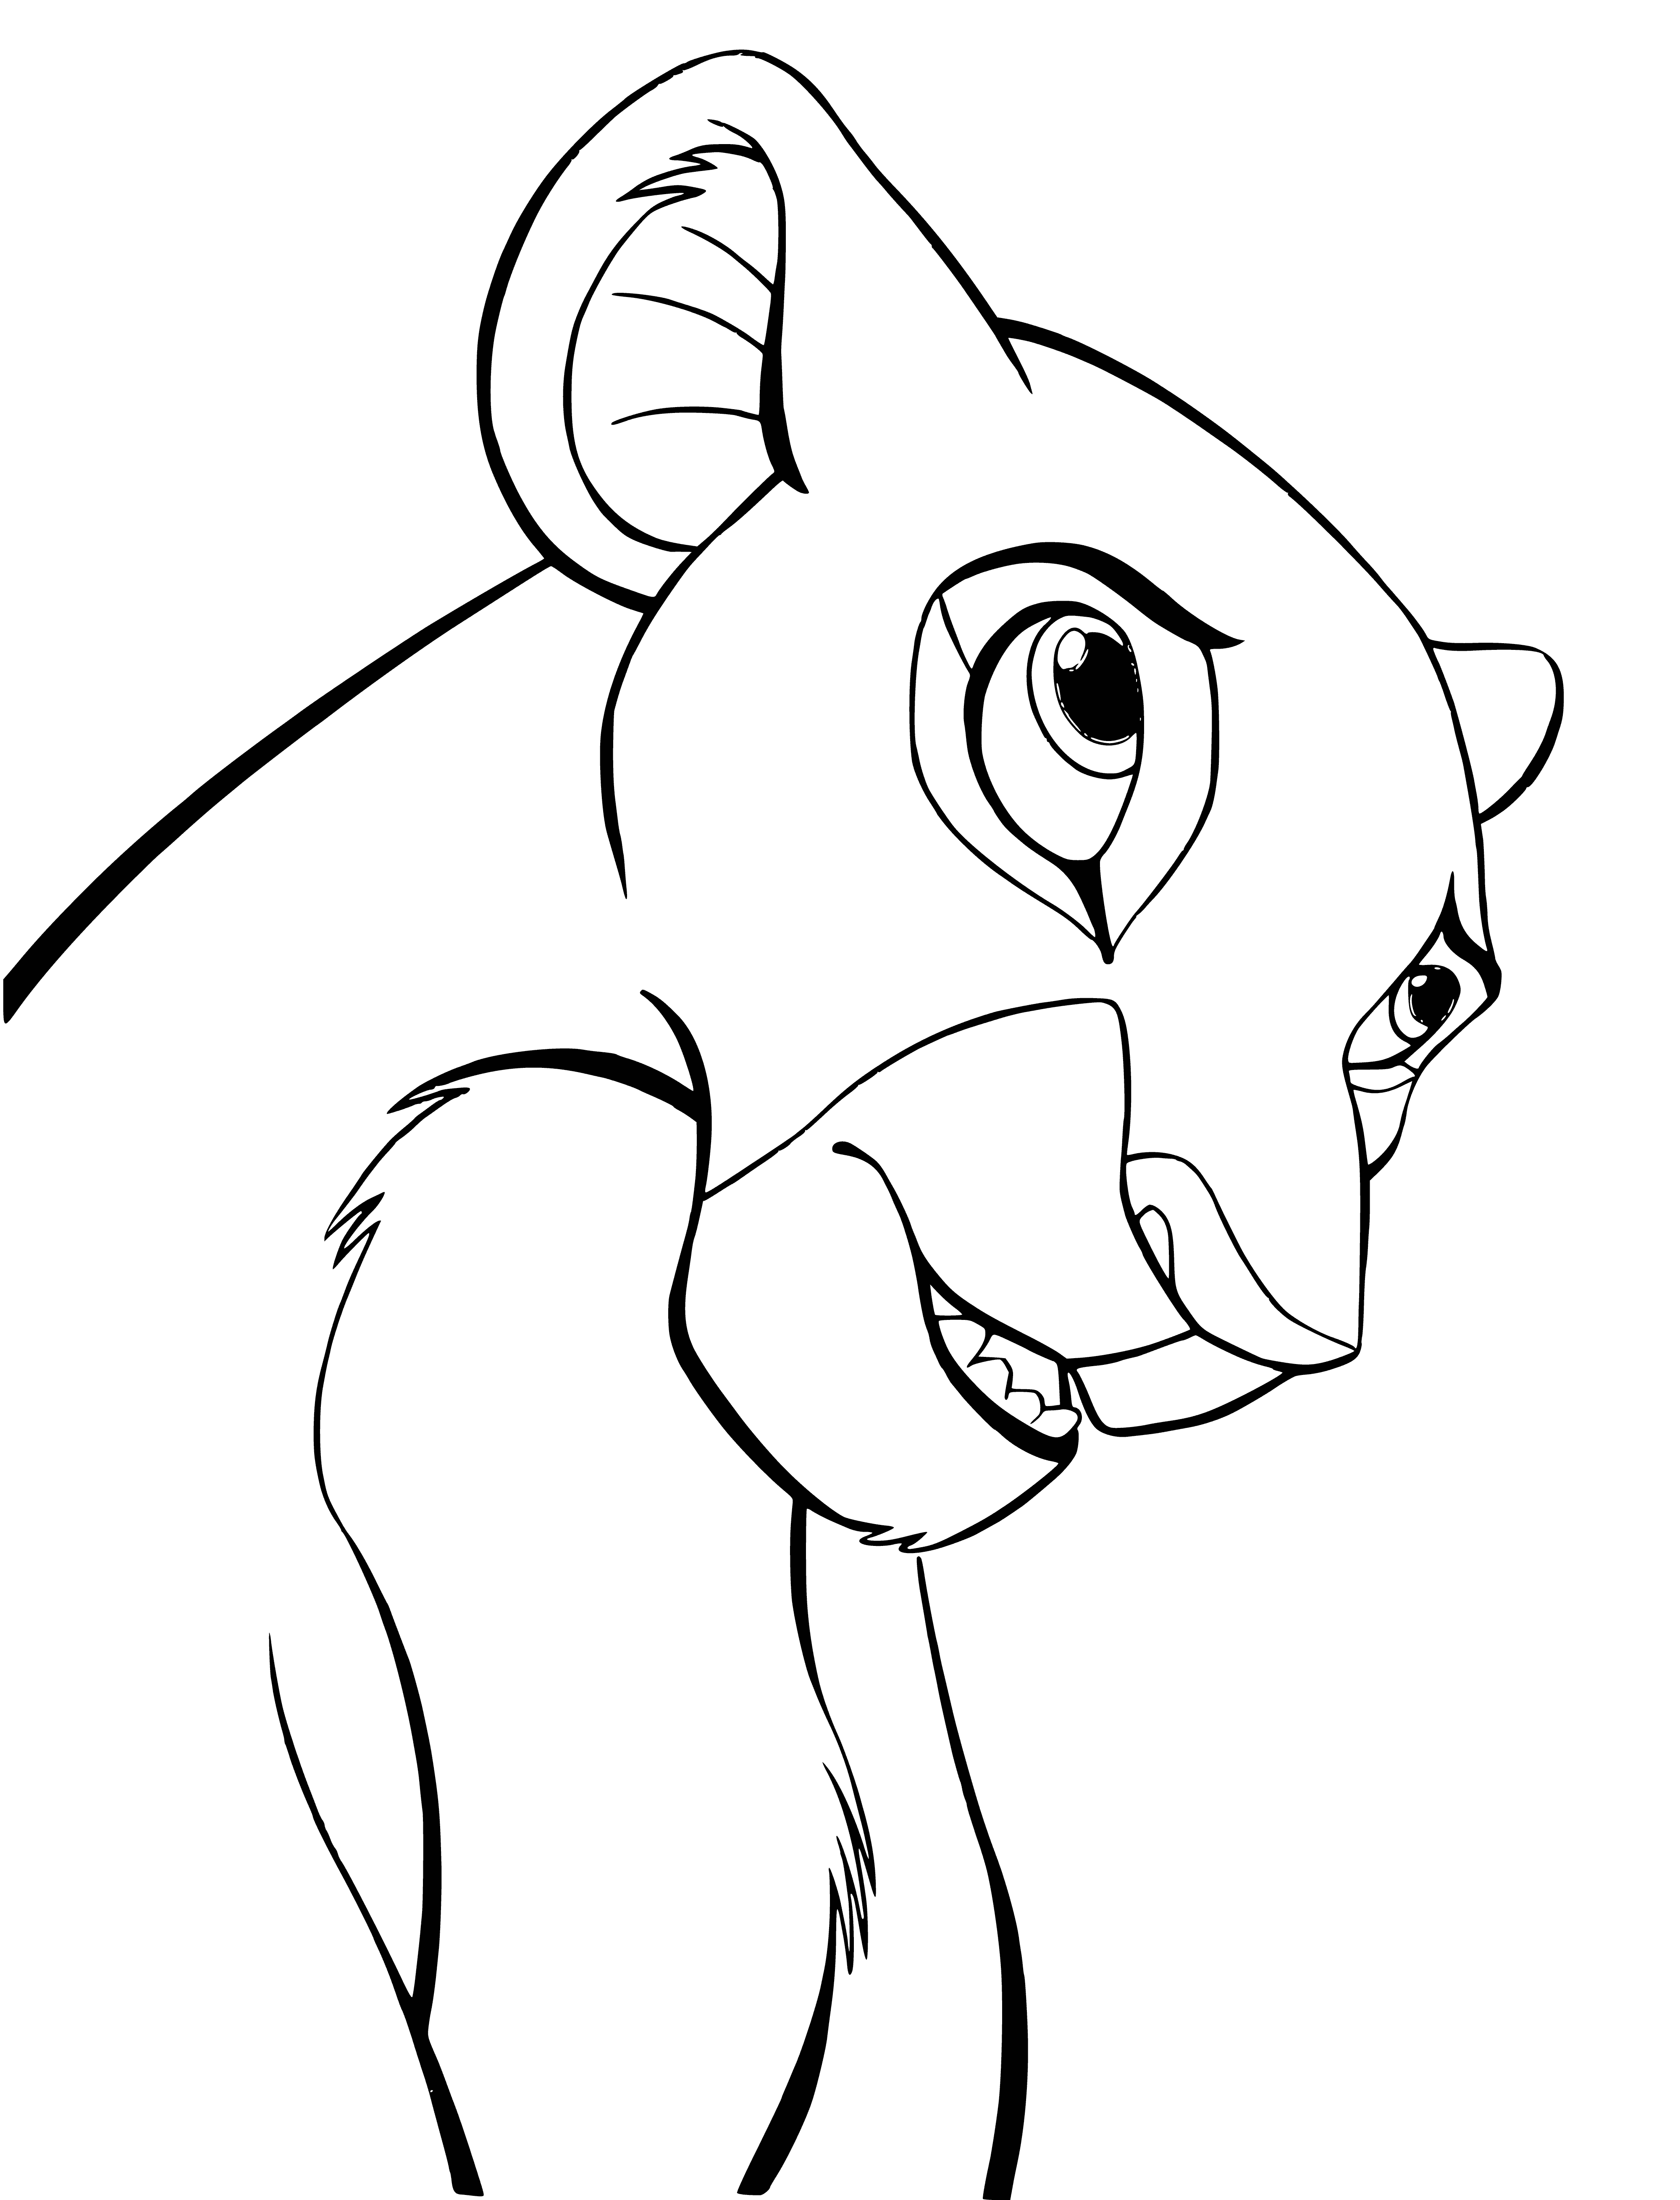 coloring page: Nala the lioness stands majestically on a rock in the African grasslands, with a bright blue sky and a light coat and mane. Her long tail and green eyes show her strength and majesty.